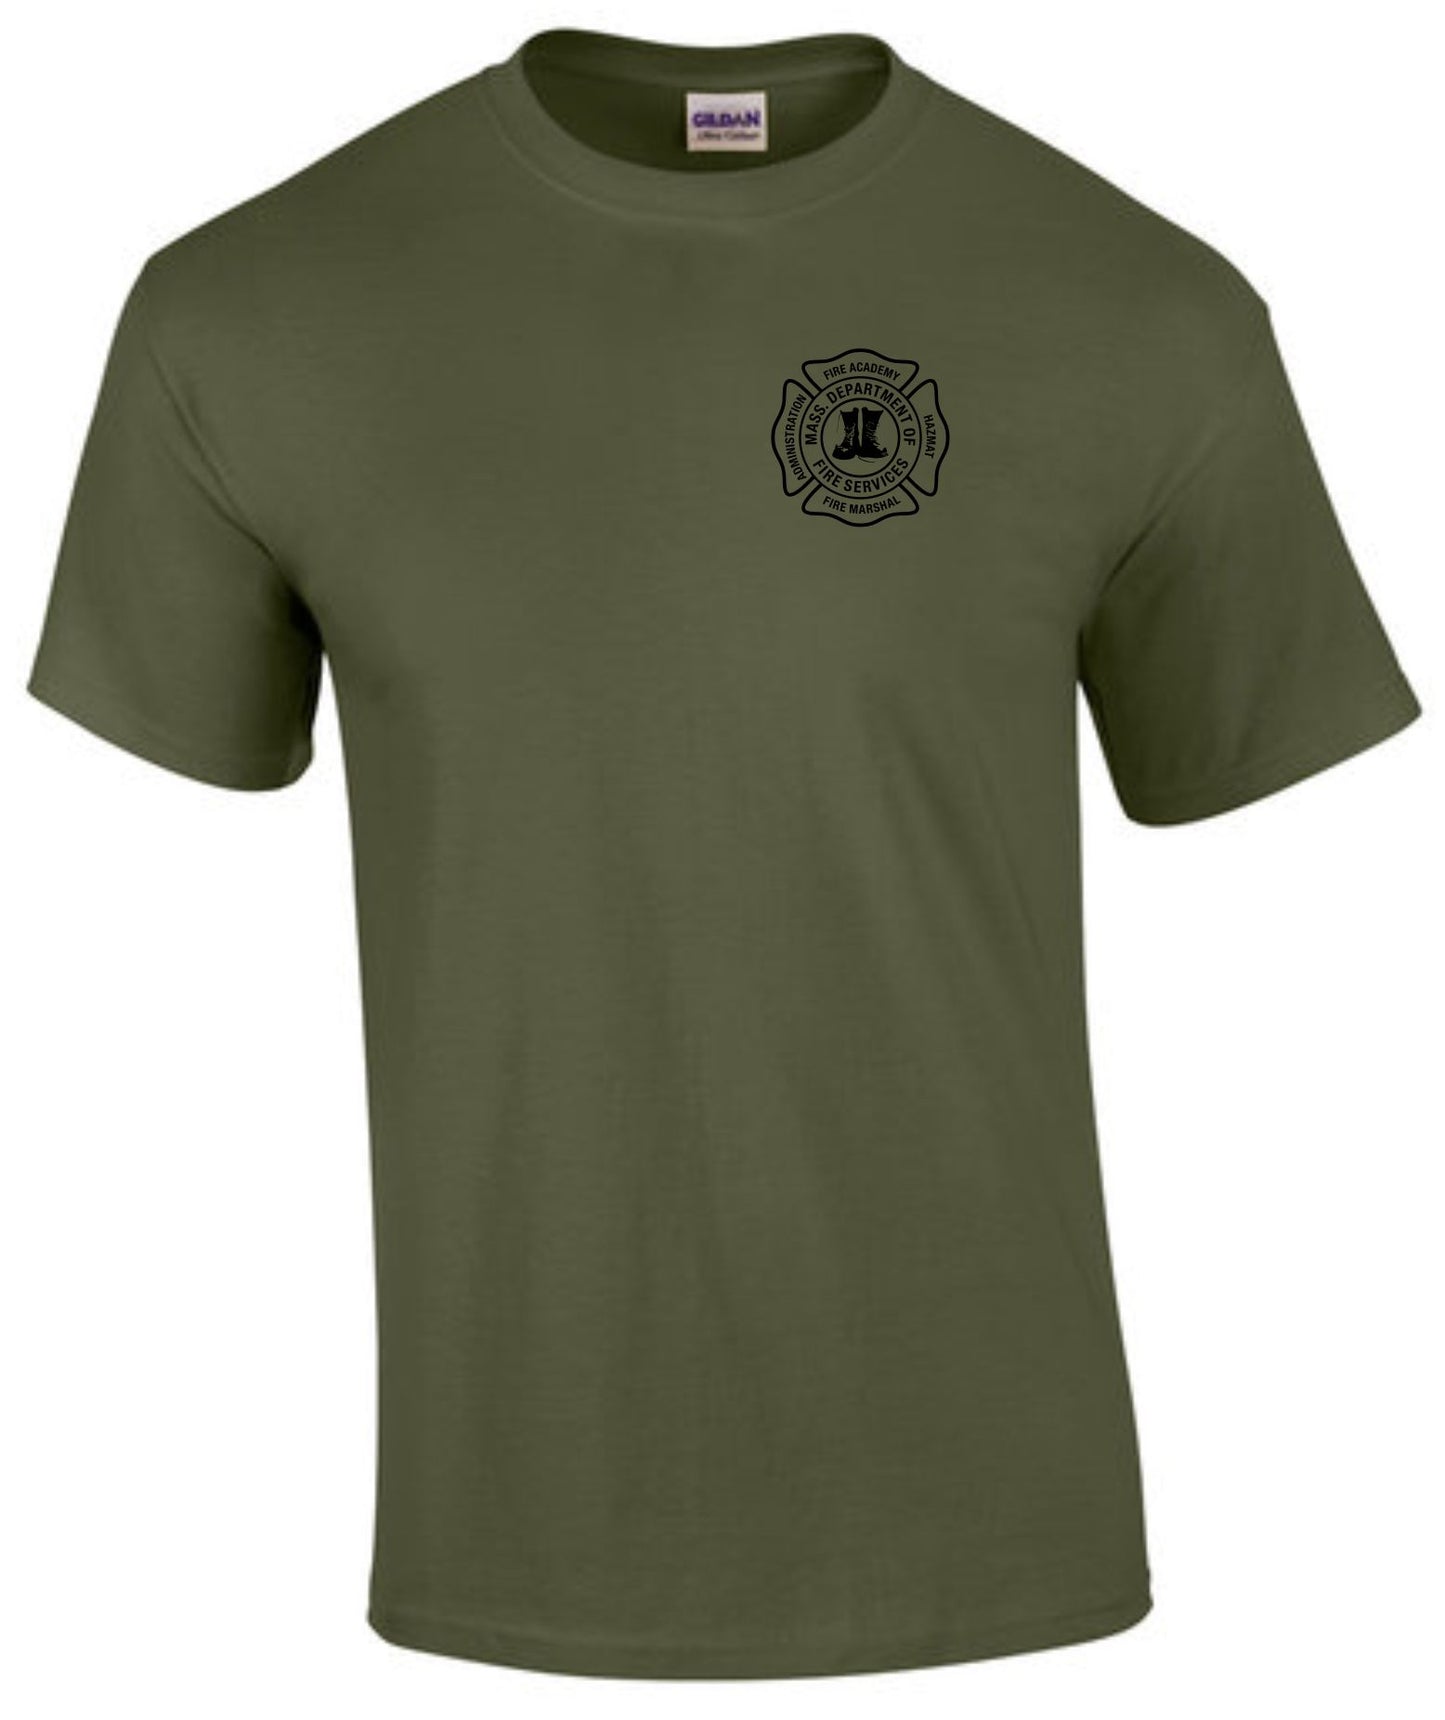 Military Green Distressed T